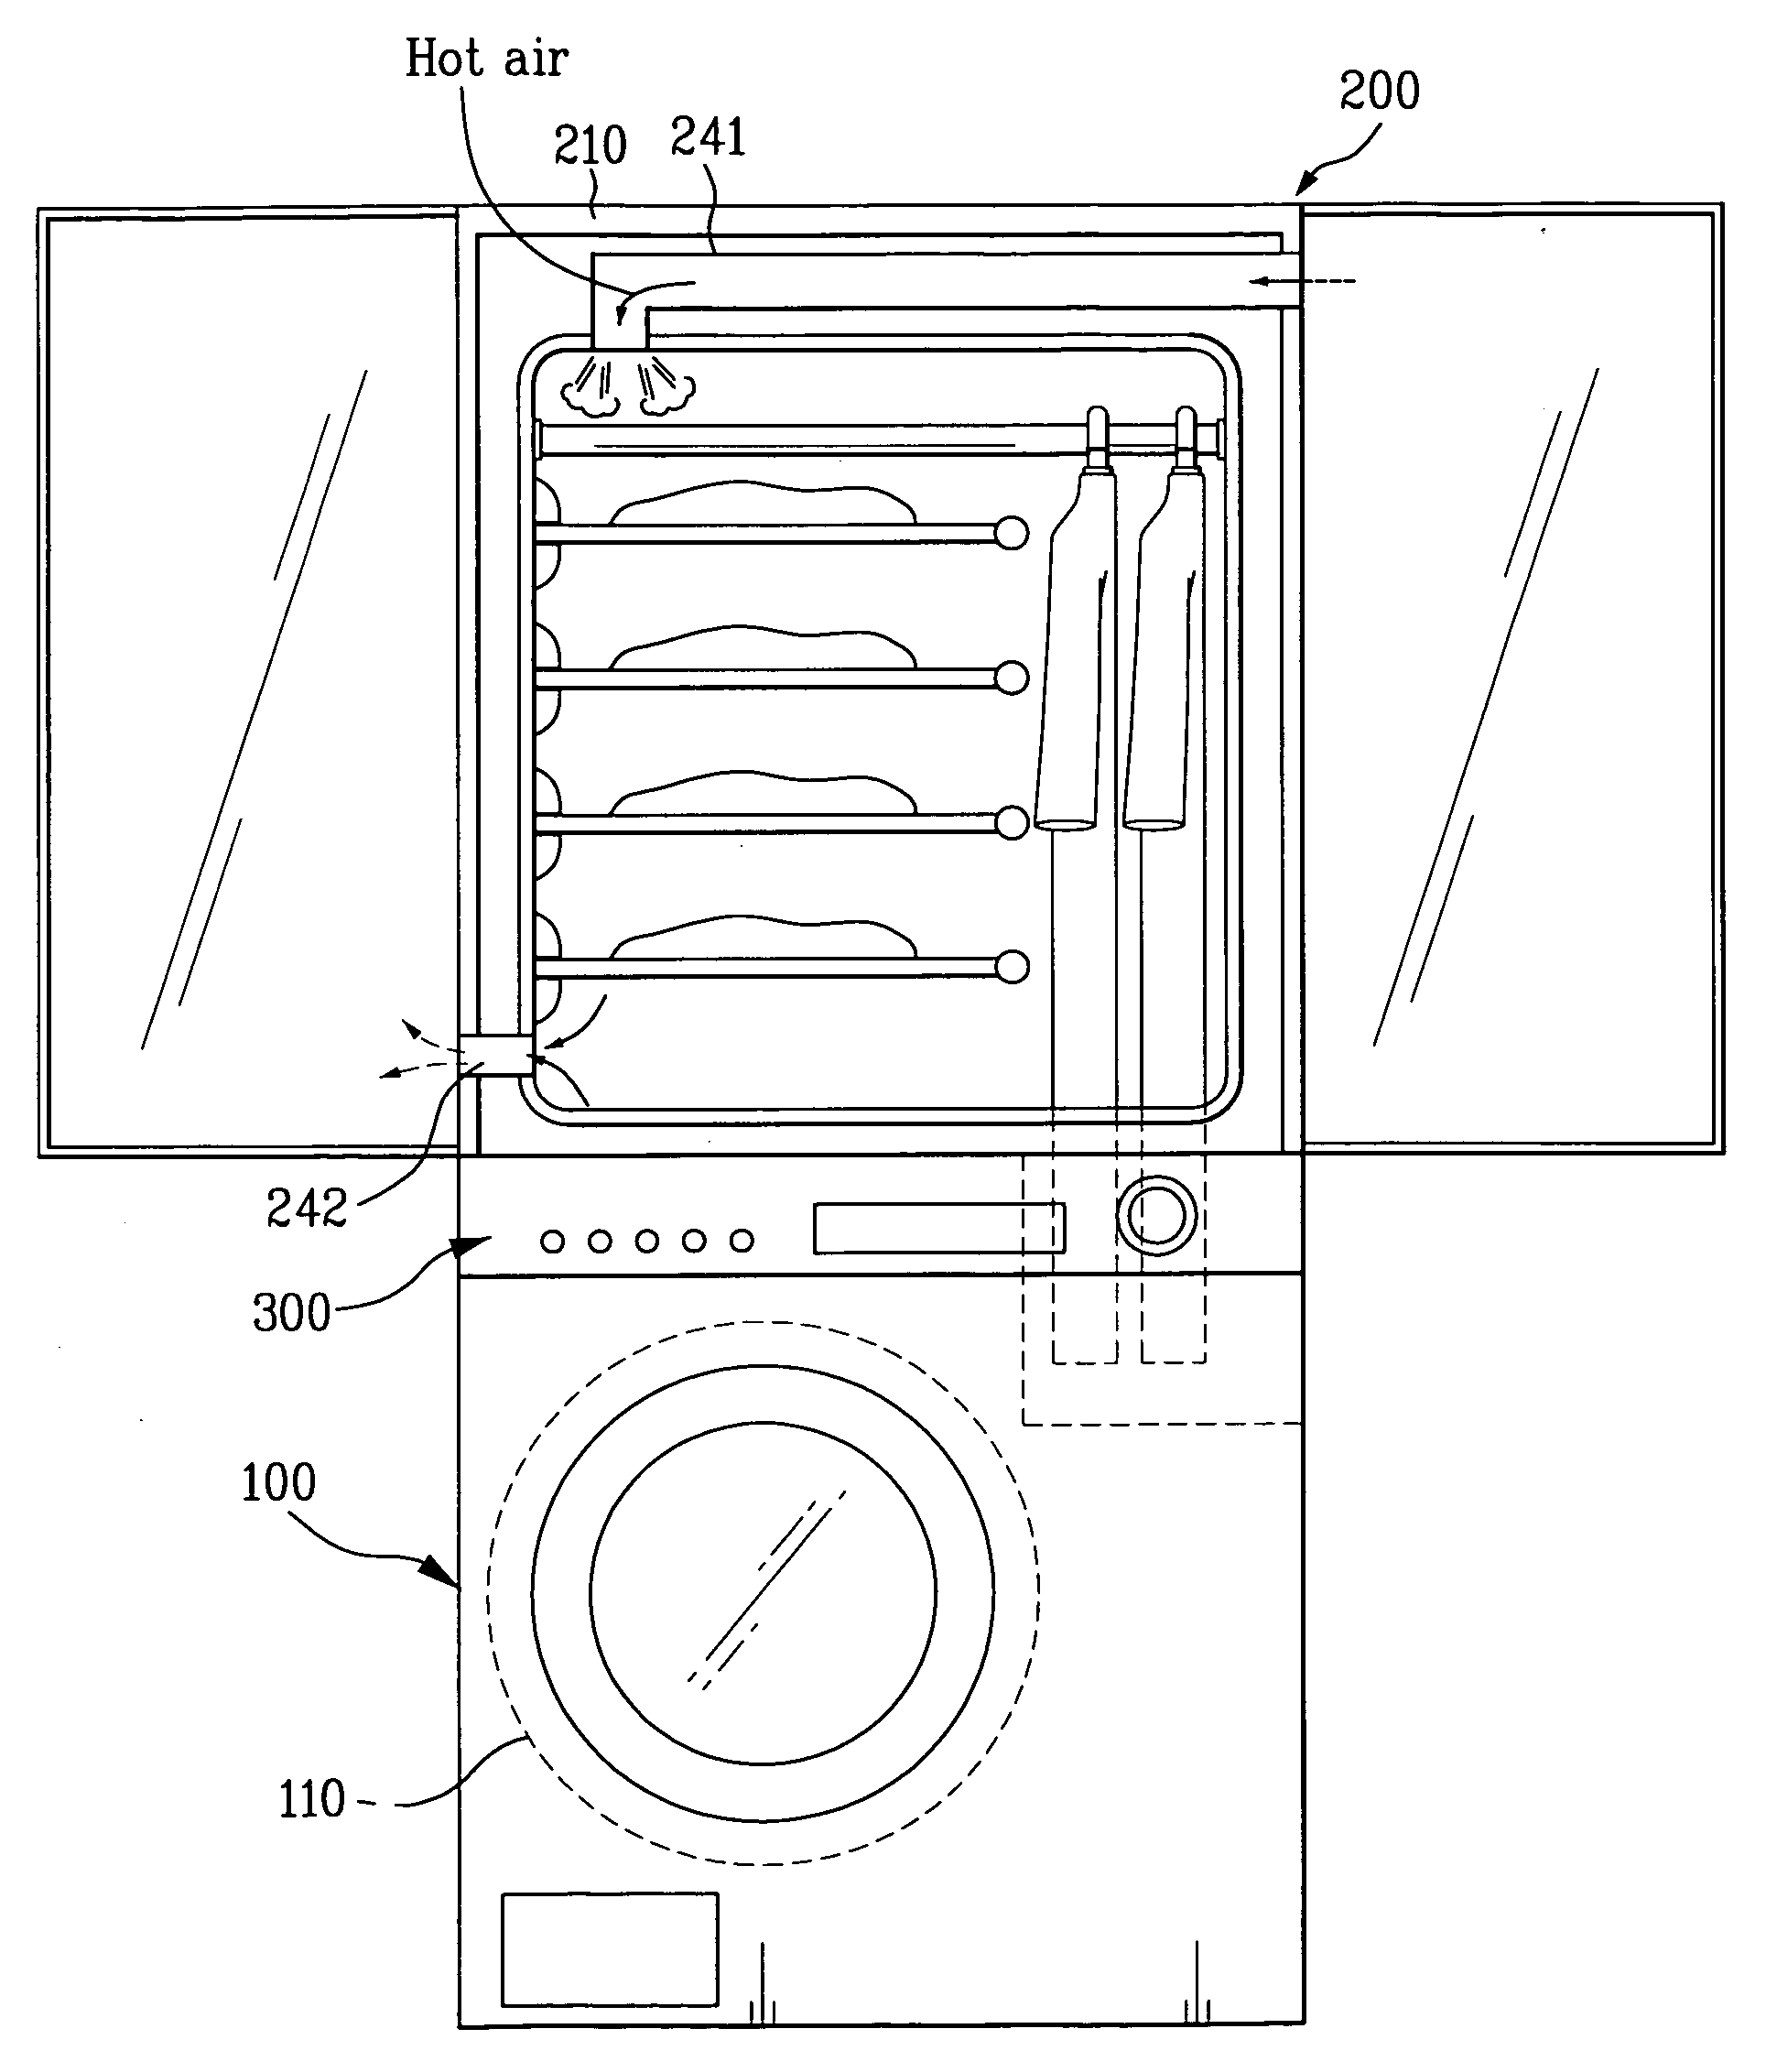 Operation method for combination dryer